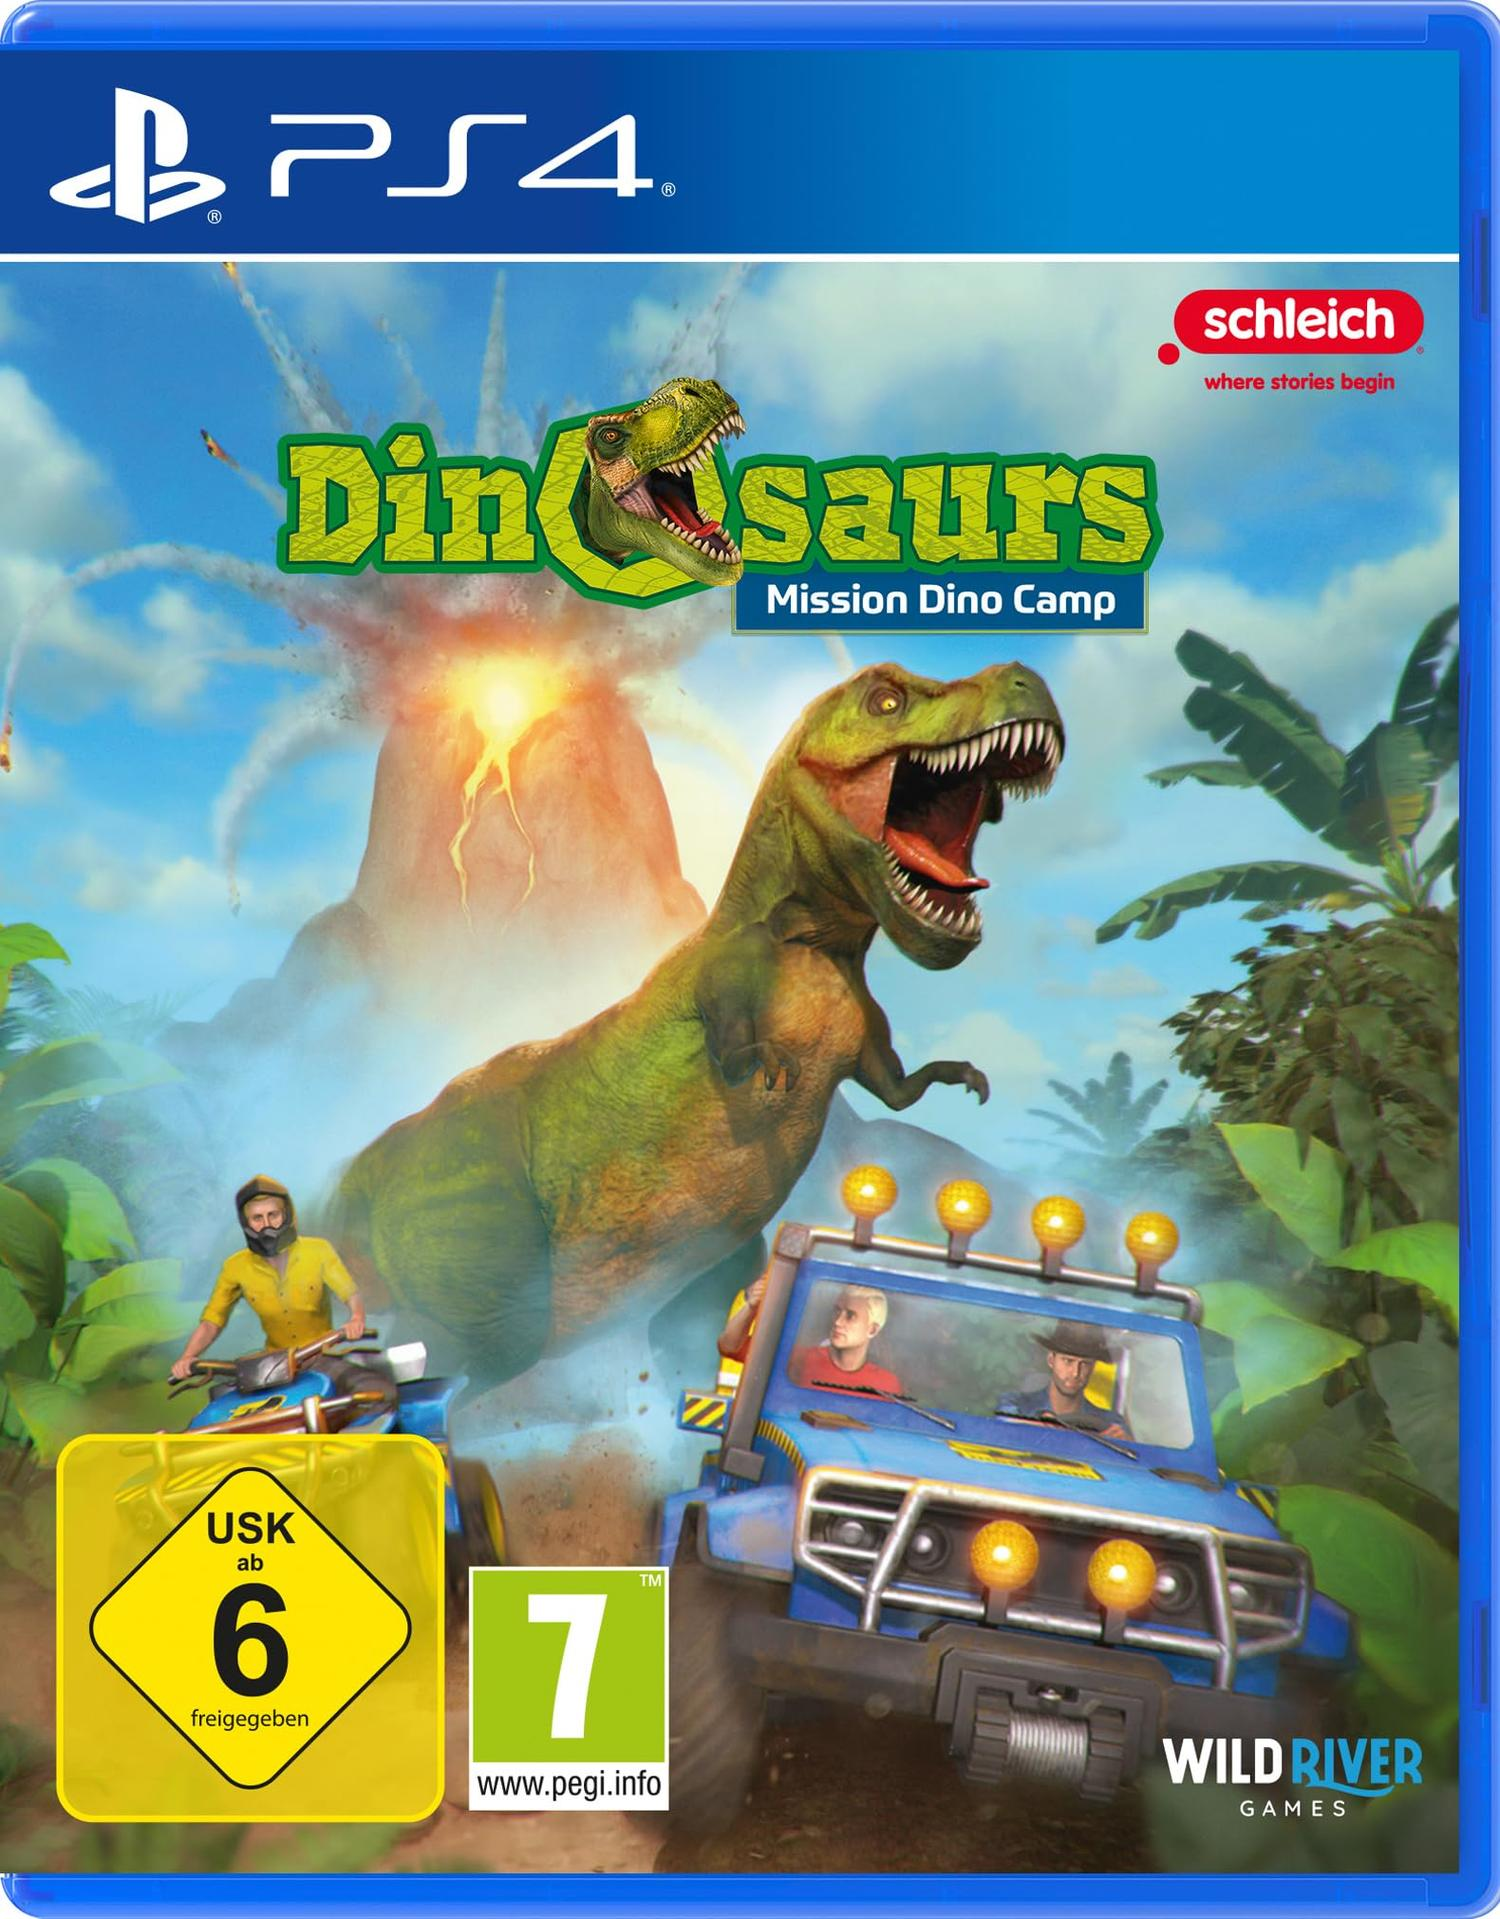 PS4 4] - Camp Schleich [PlayStation Dino Mission Dinosaurs